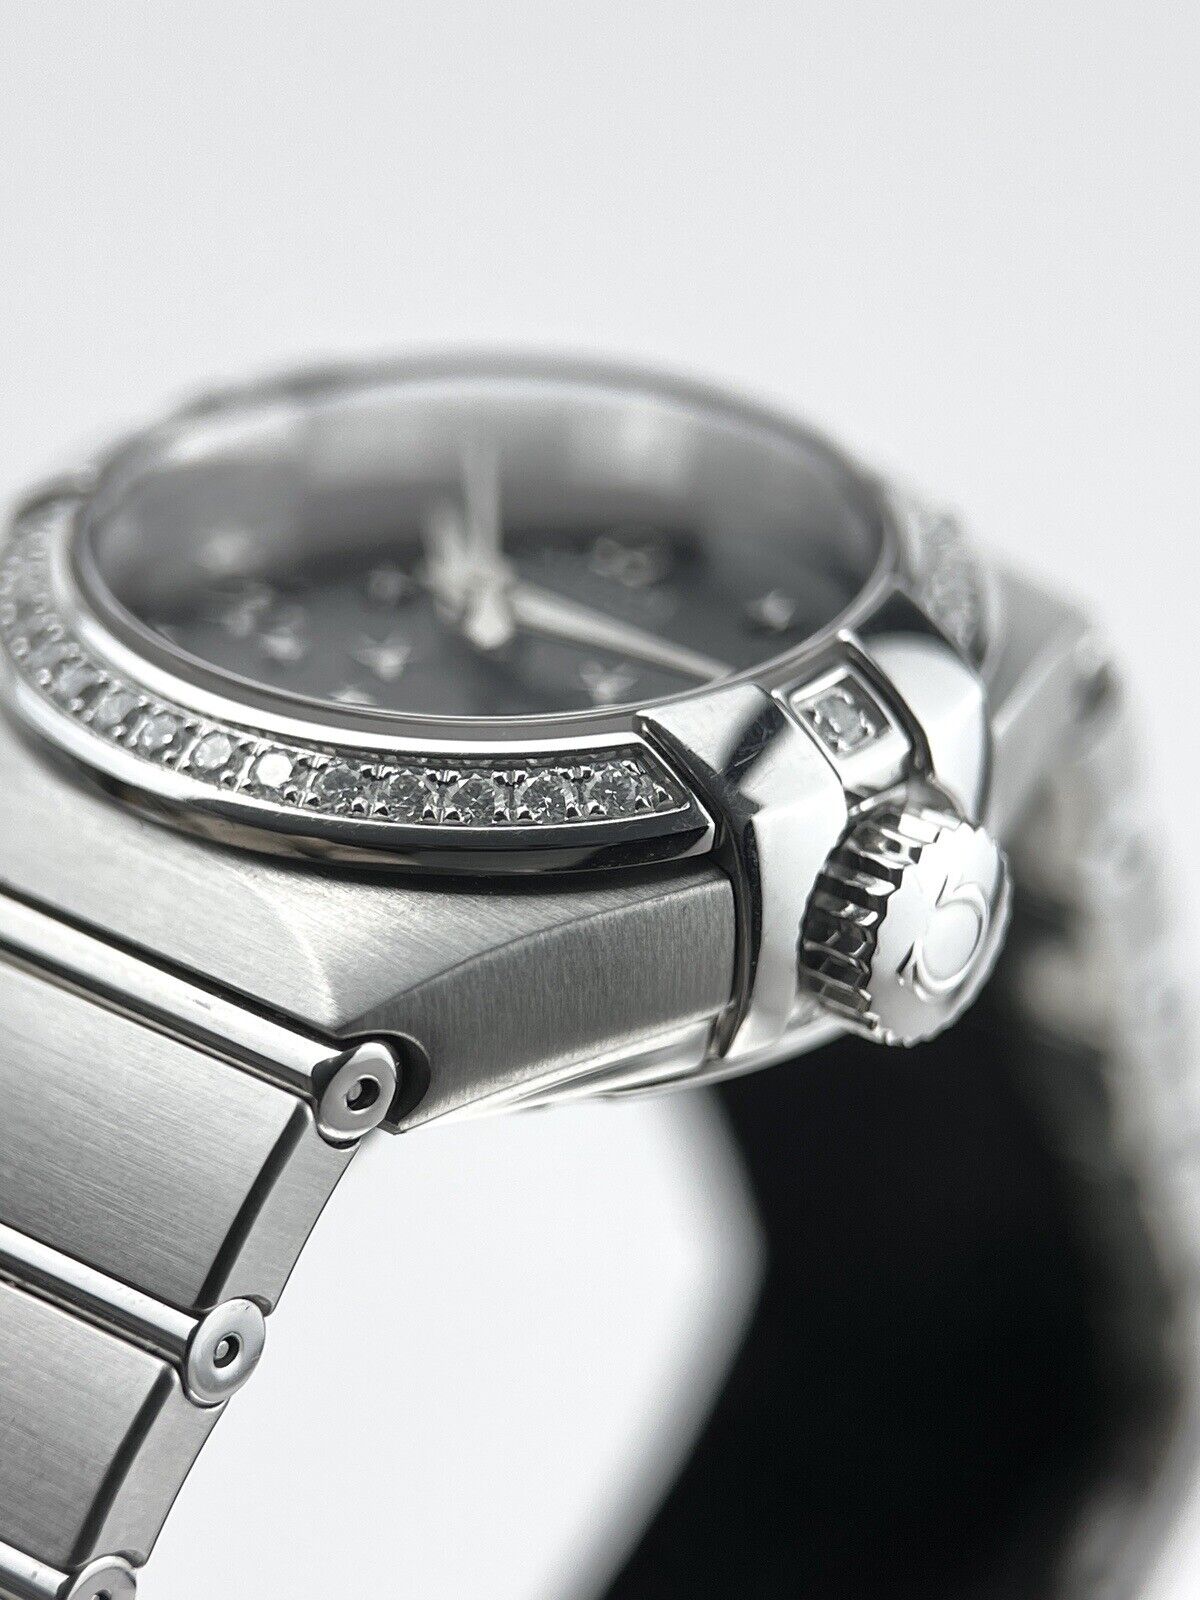 OMEGA Constellation 123.15.27.20.01.001 Dial Lady's Watch - Factory Diamonds